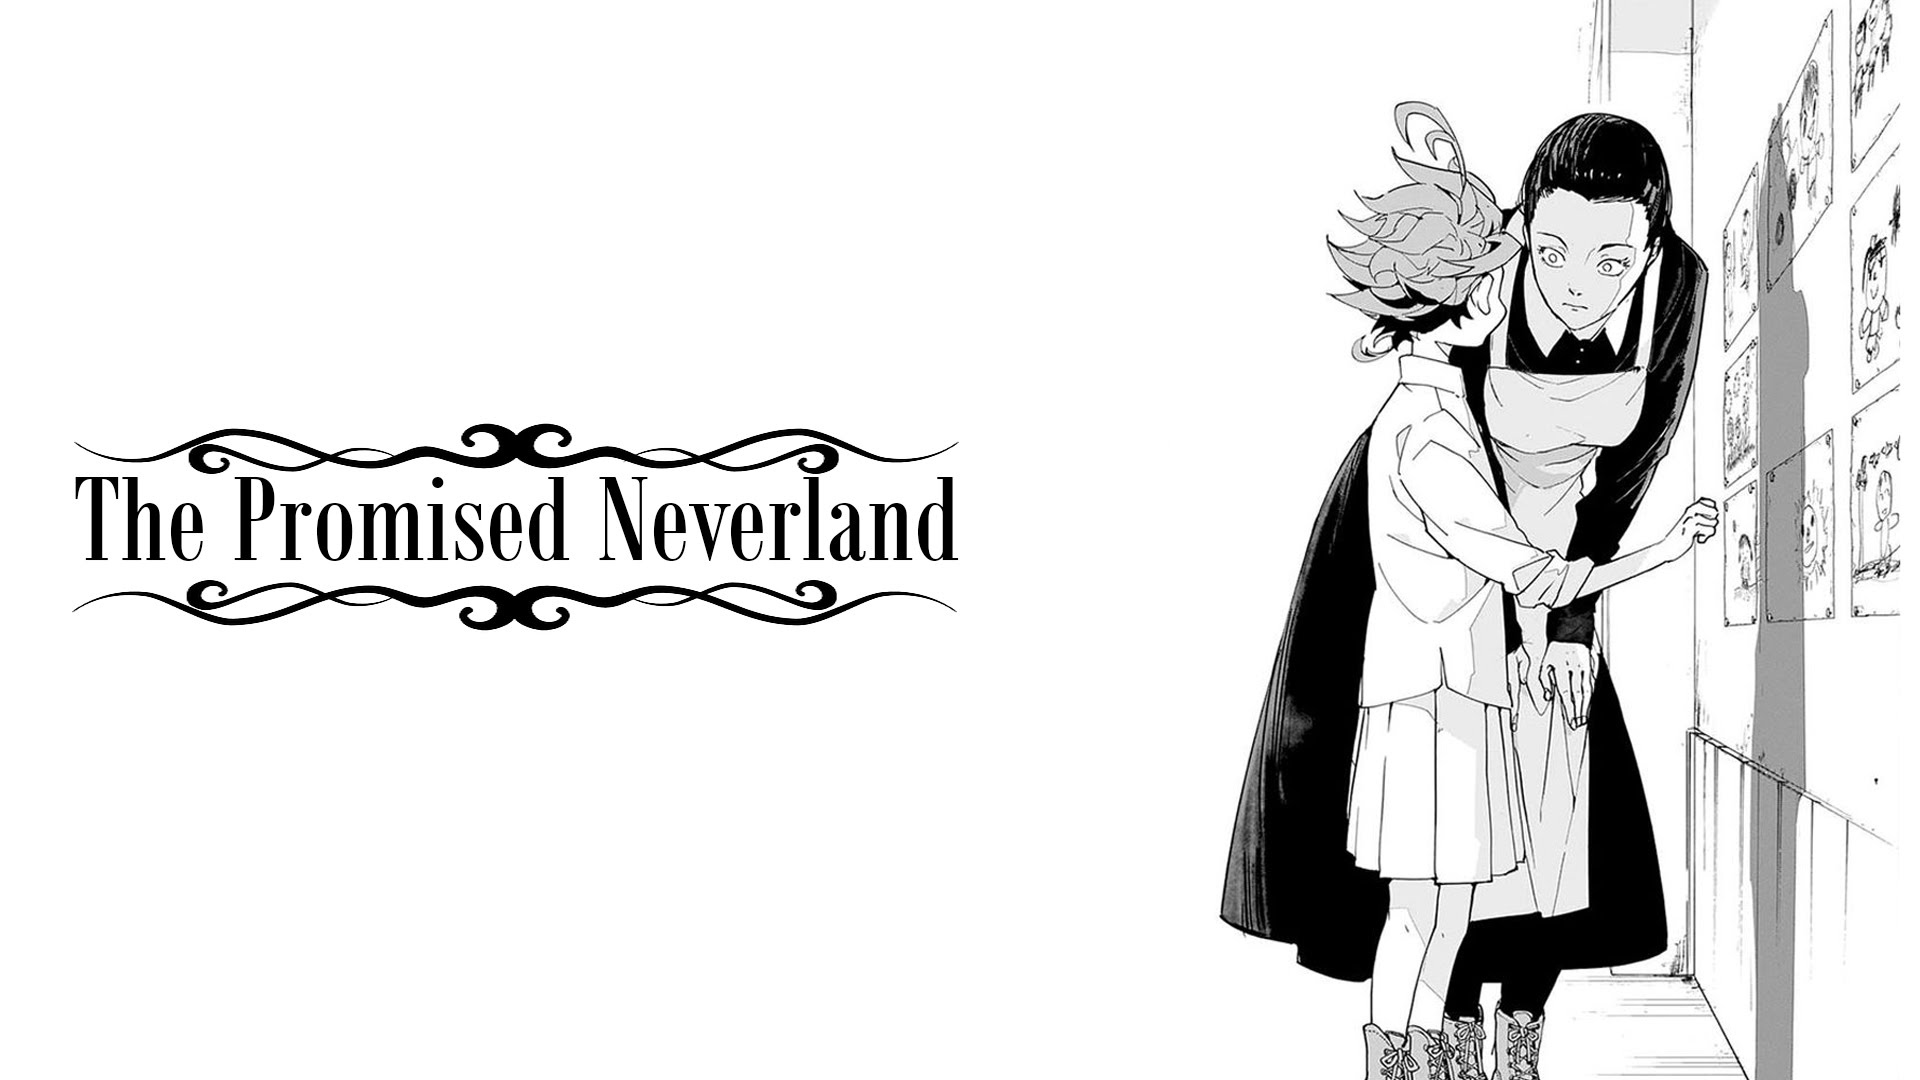 How To Strategize Like Norman(The Promised Neverland 